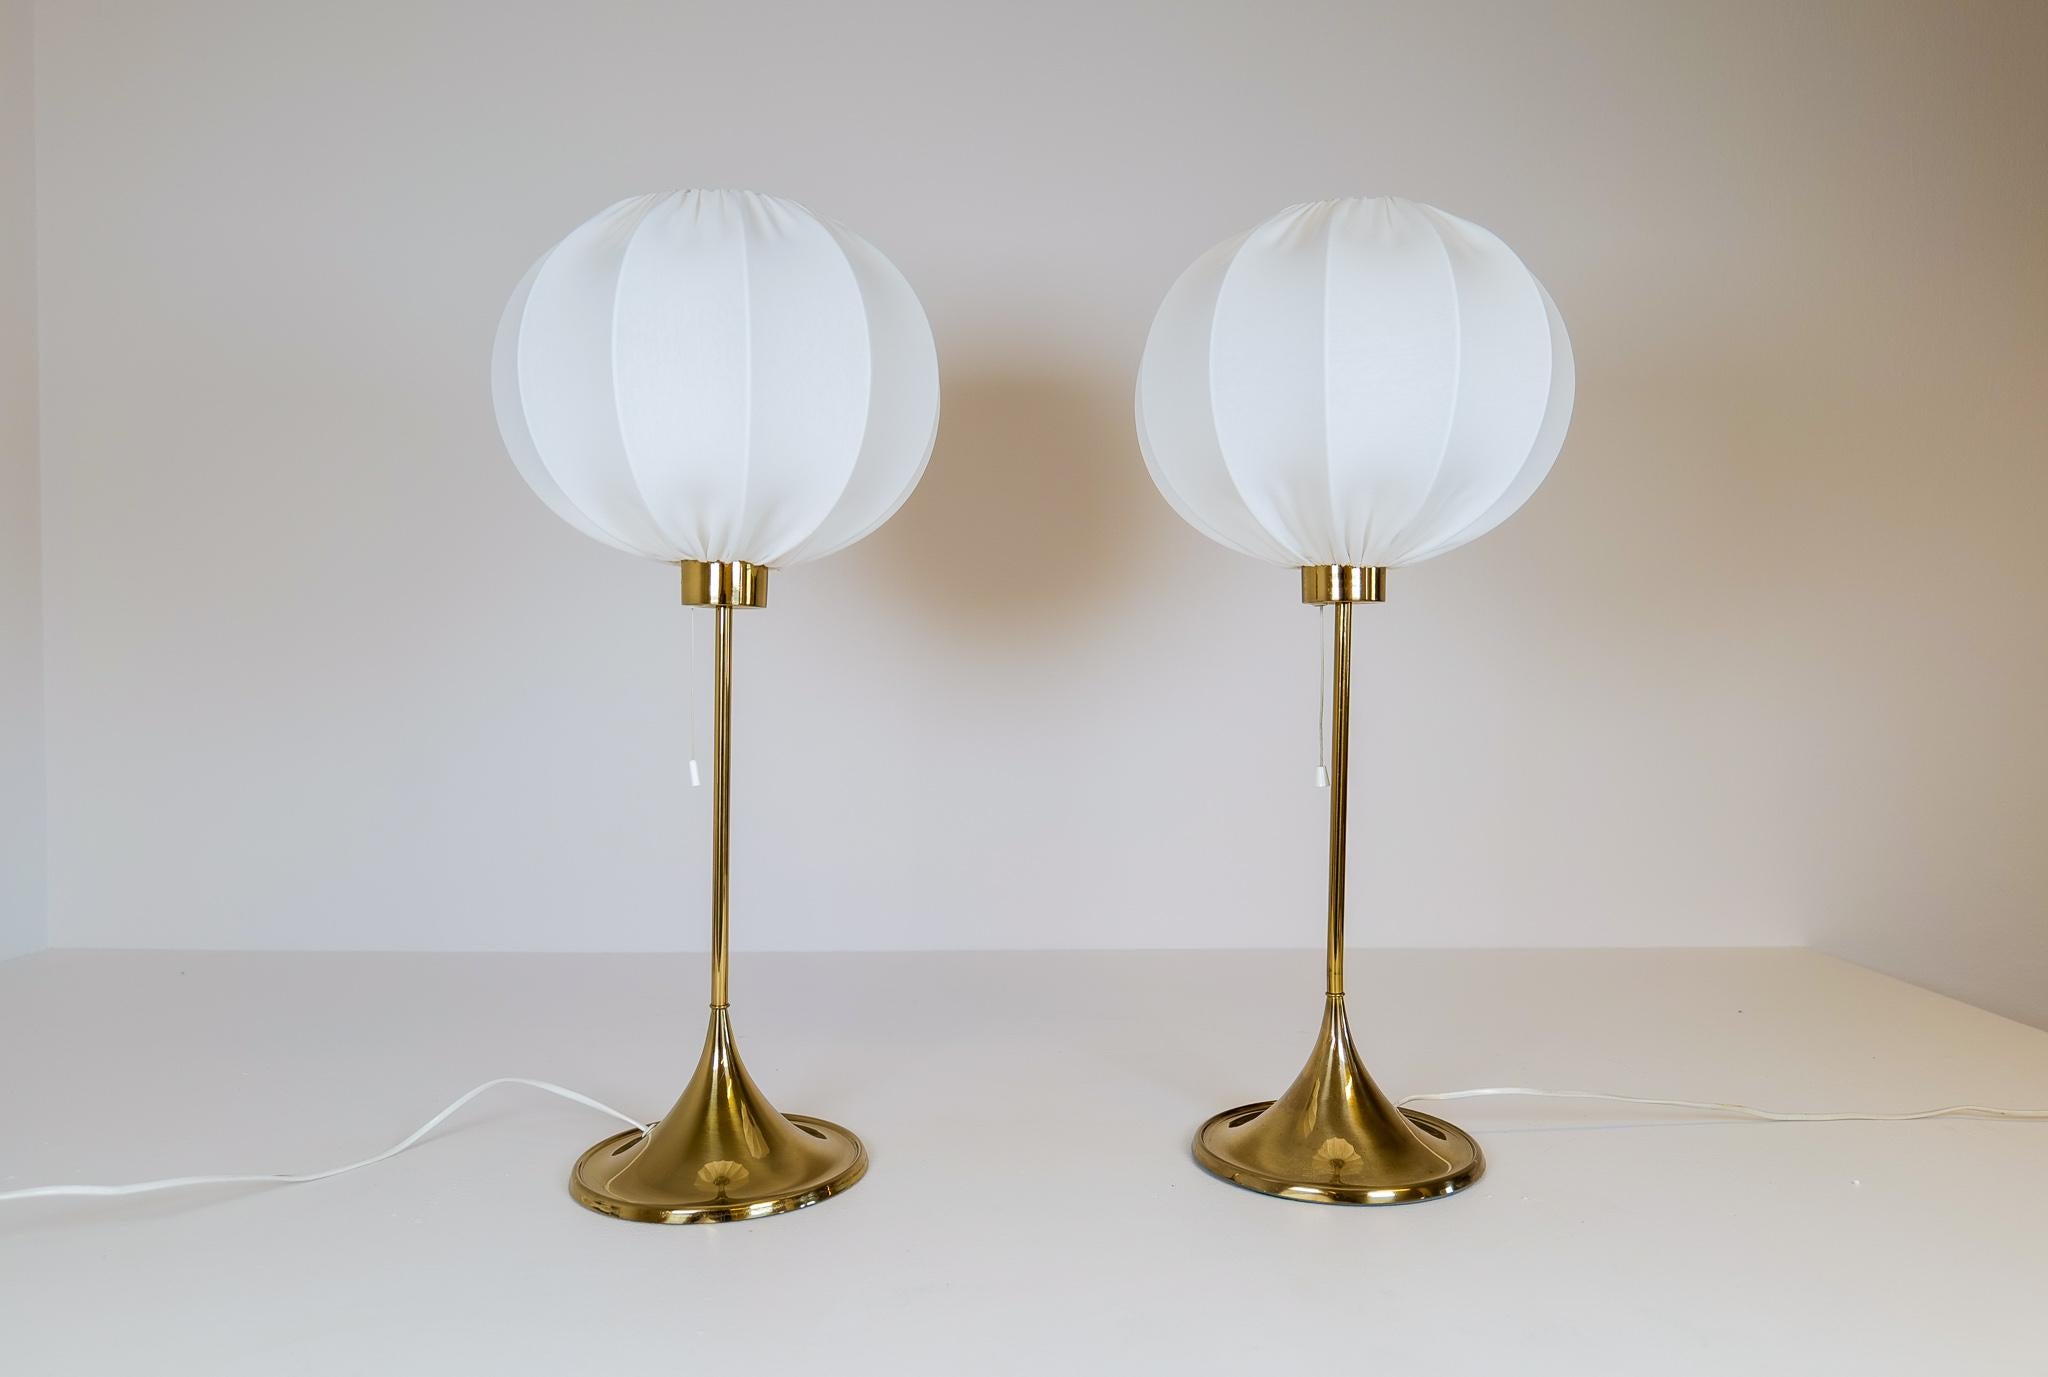 The table version of the iconic Bergboms design with all new cotton shades, made in Sweden. Cast iron base finished in brass. This pair of table lamps will give that great look to a vintage home or a twist to the modern home. This pair with cloud